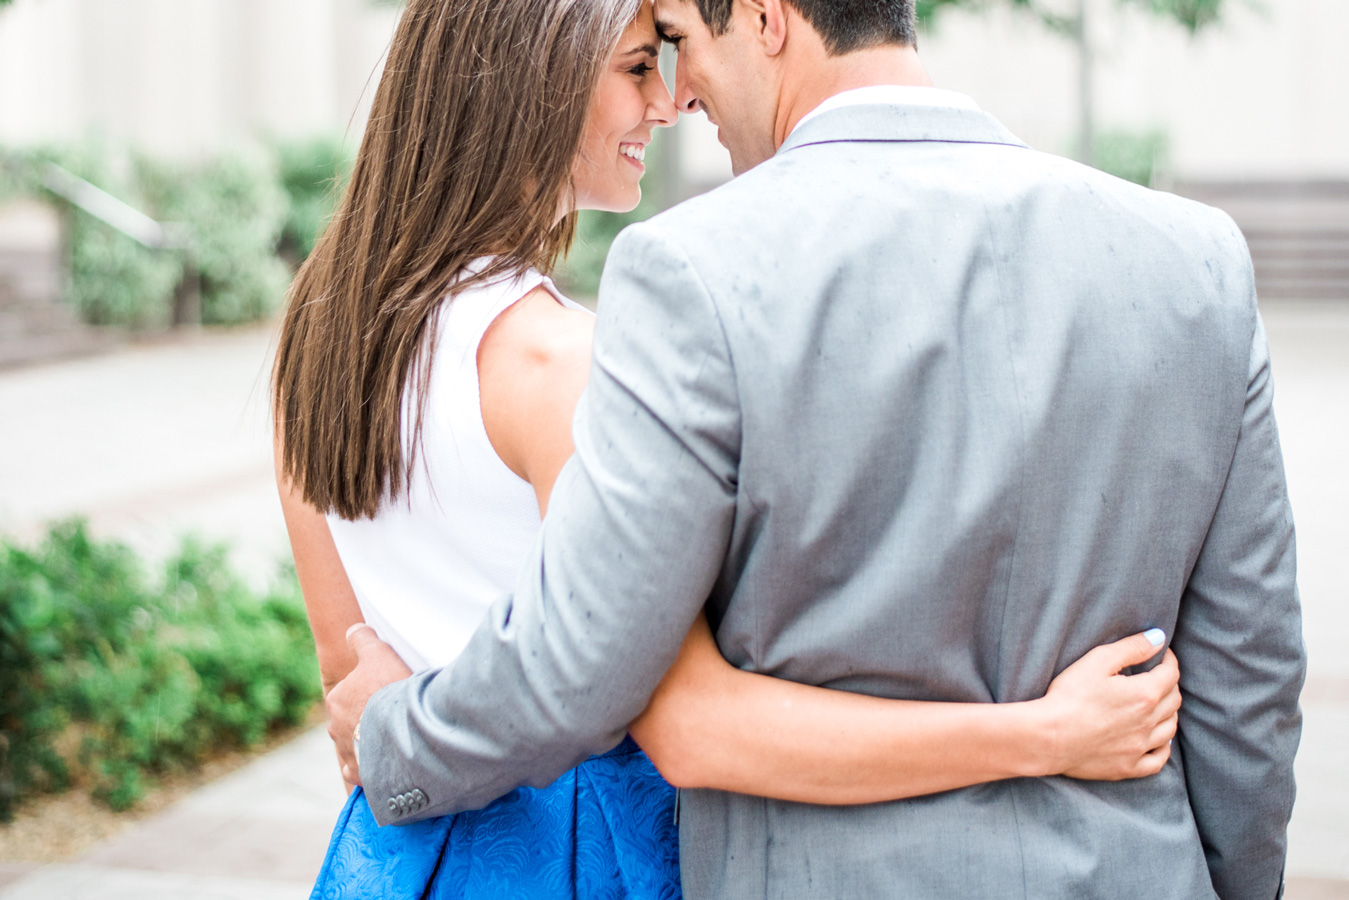 C Ward Photography photographs an engagement session at Smith Center in Las Vegas.